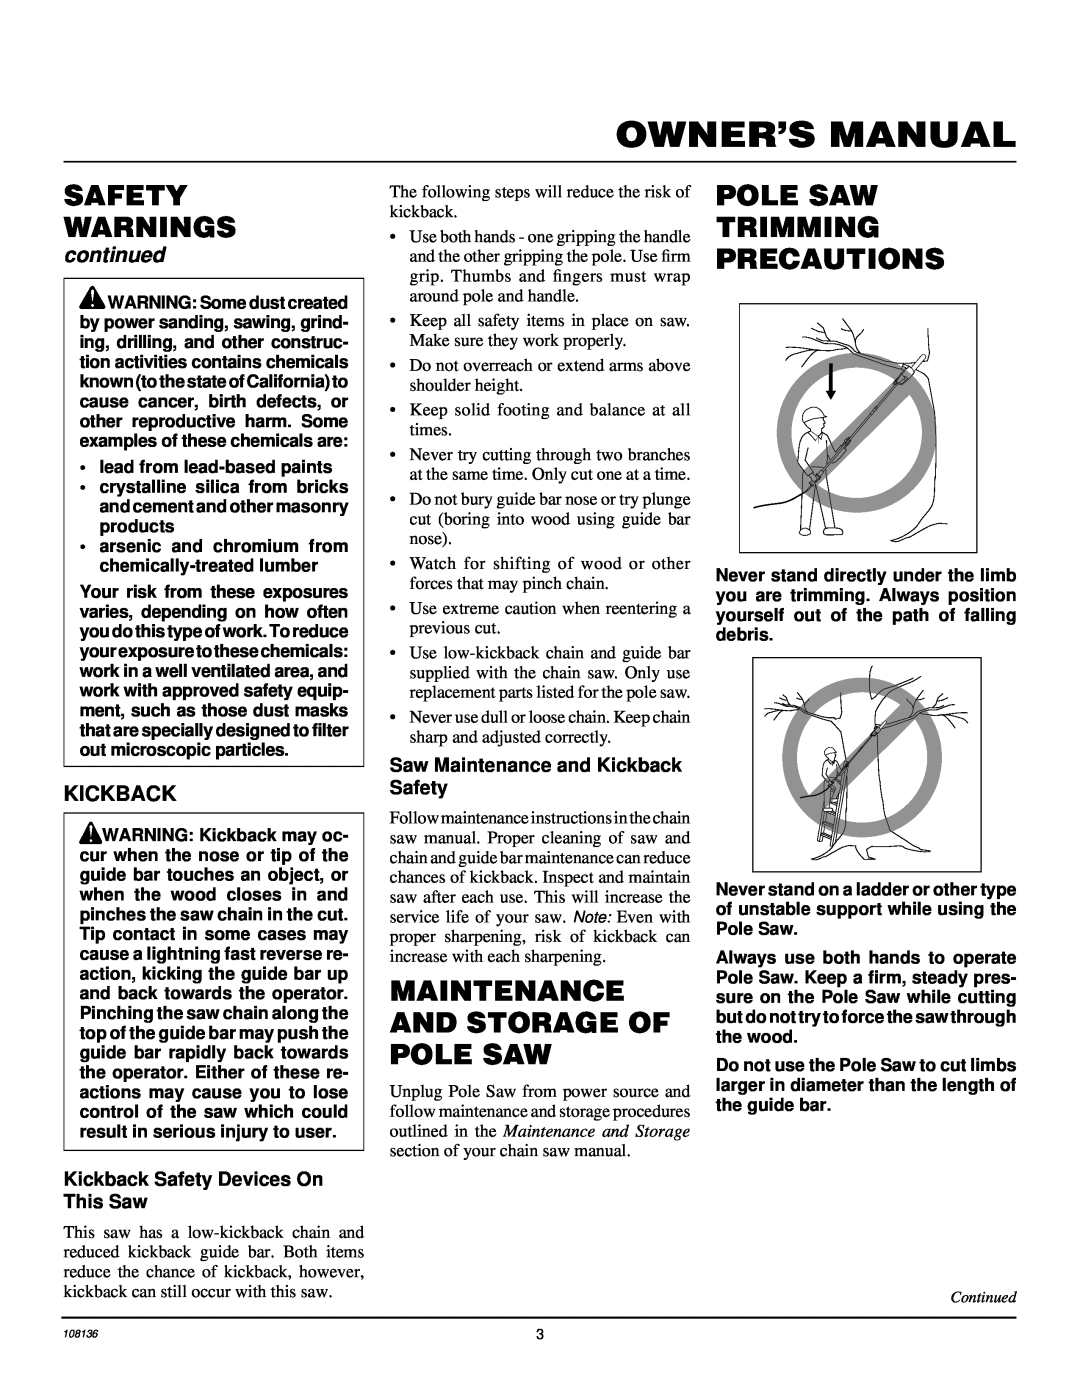 Remington RPS96 Maintenance And Storage Of Pole Saw, Pole Saw Trimming Precautions, continued, Kickback, Safety Warnings 